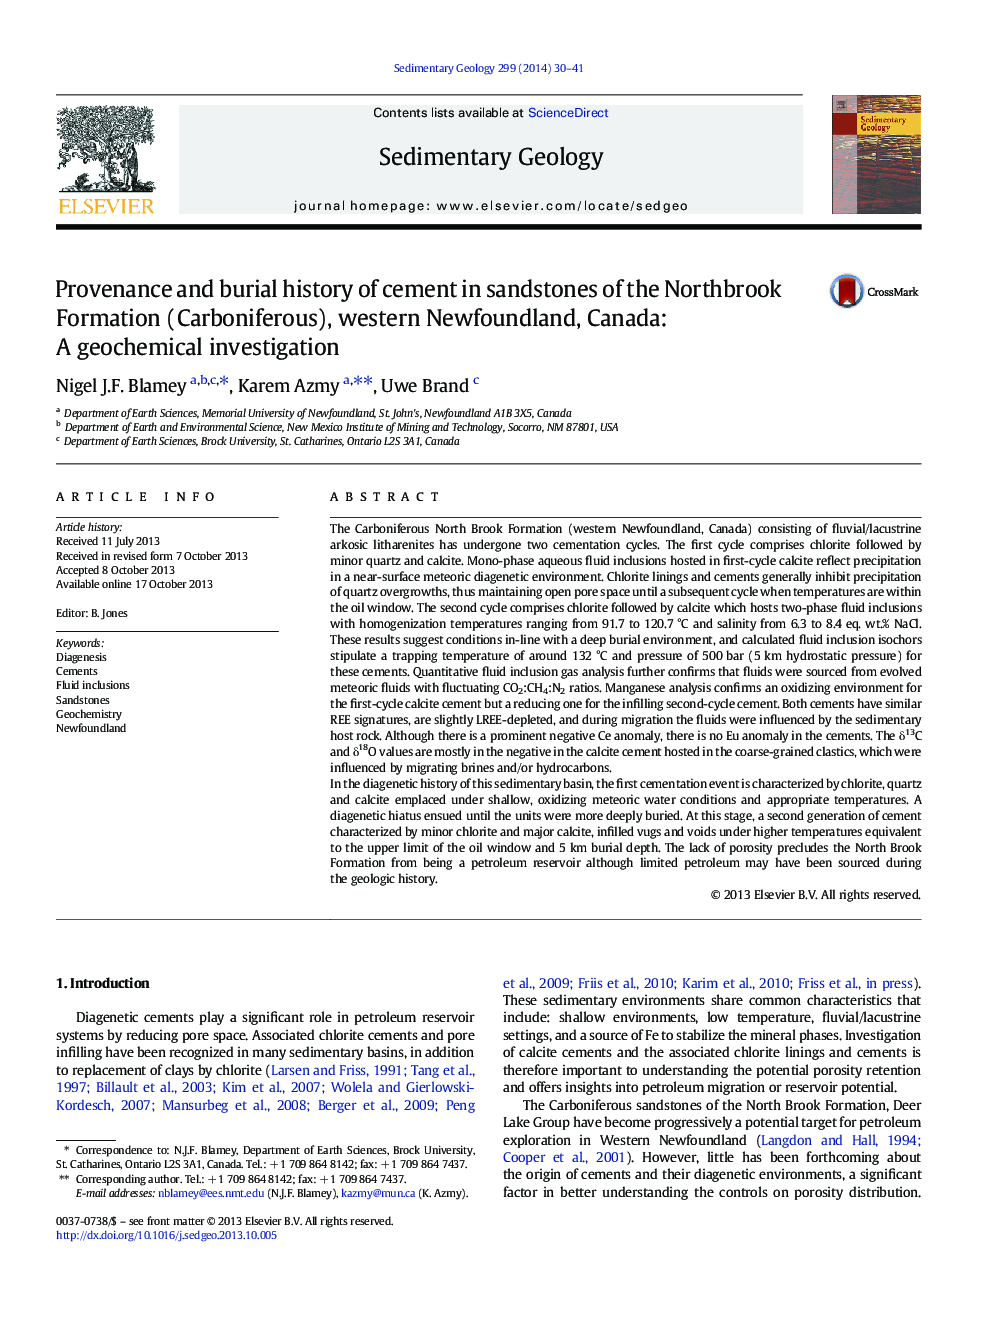 Provenance and burial history of cement in sandstones of the Northbrook Formation (Carboniferous), western Newfoundland, Canada: A geochemical investigation